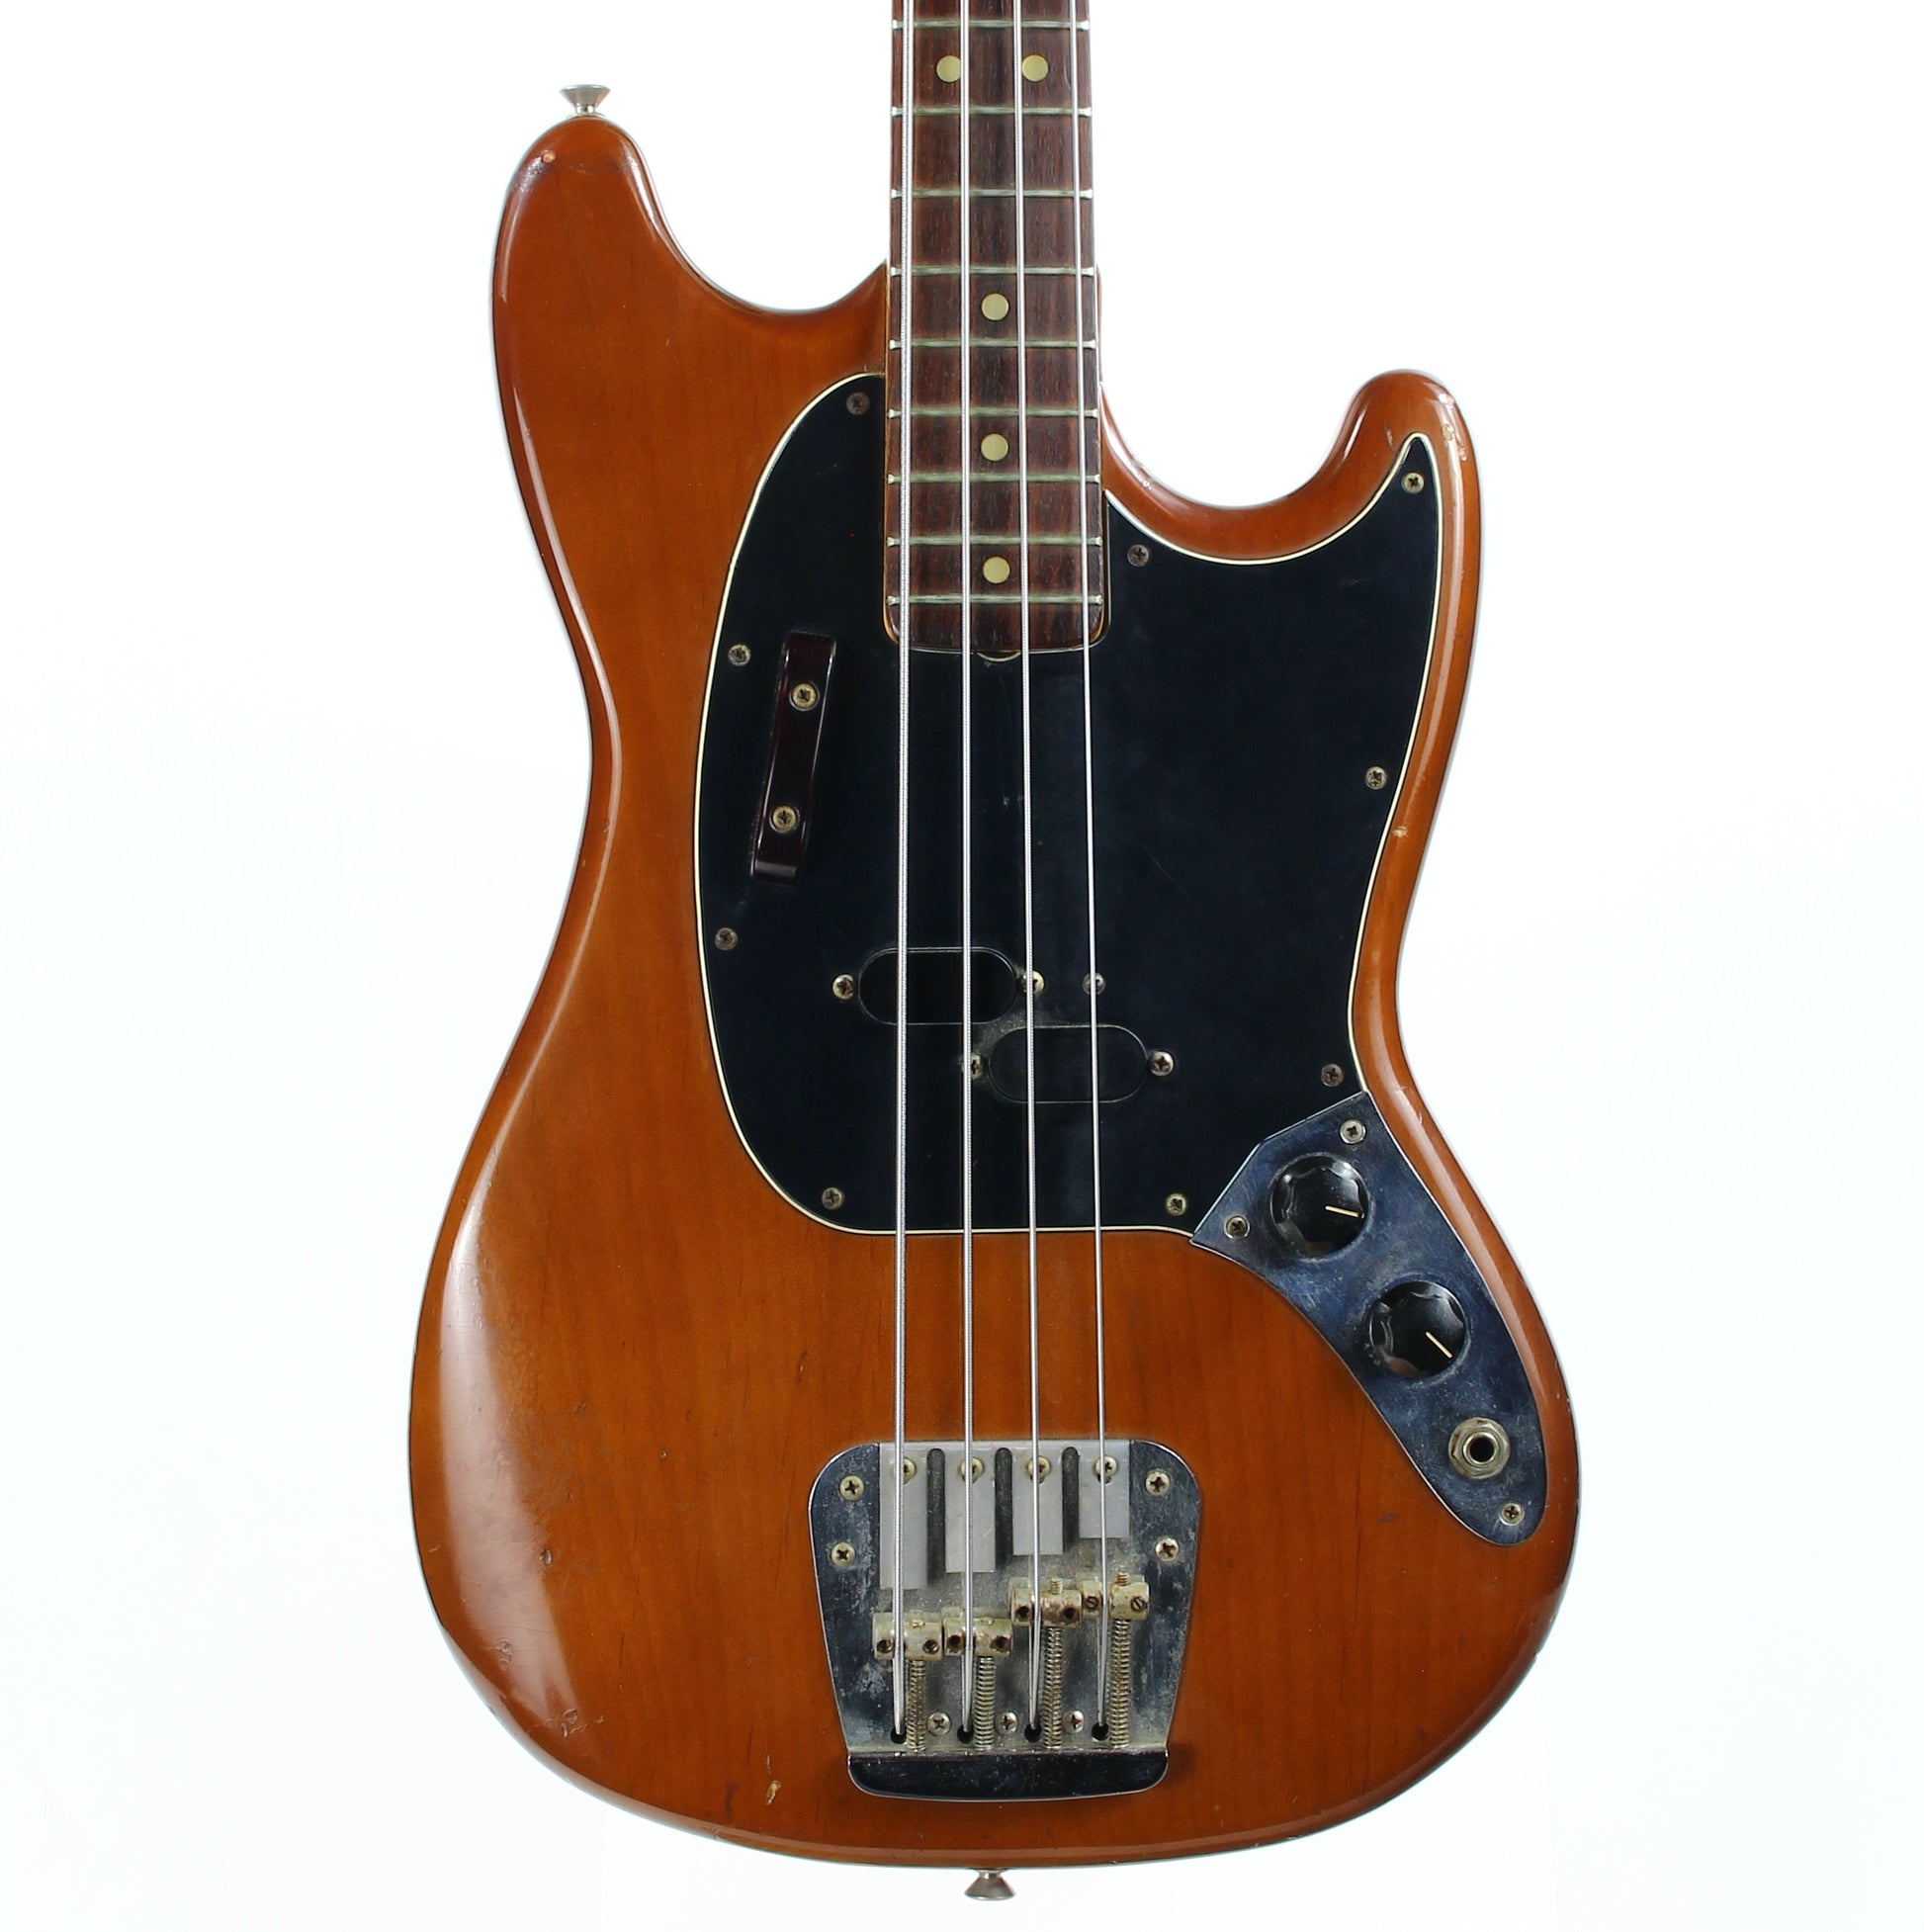 1970's Fender Mustang Bass in Walnut with black pickguard